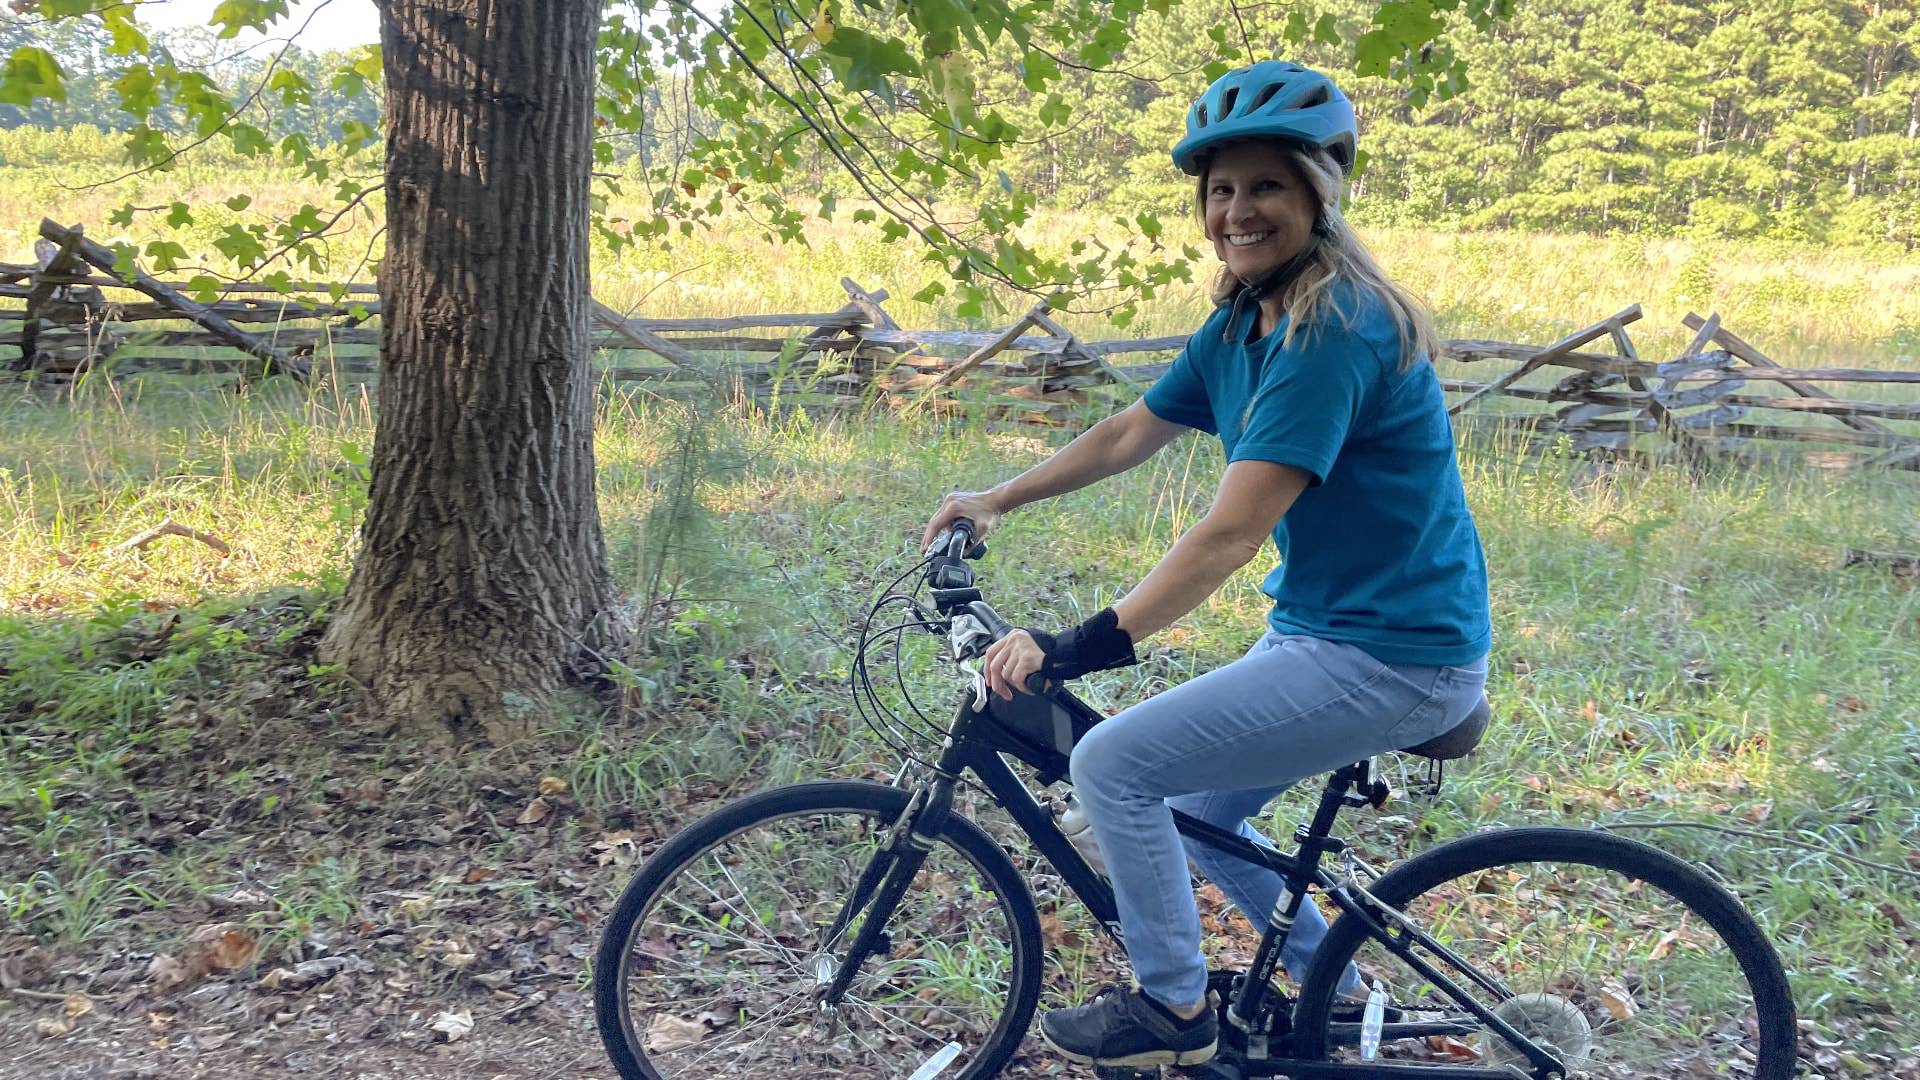 Woman with blue shirt and blue helmet riding a bike in the woods